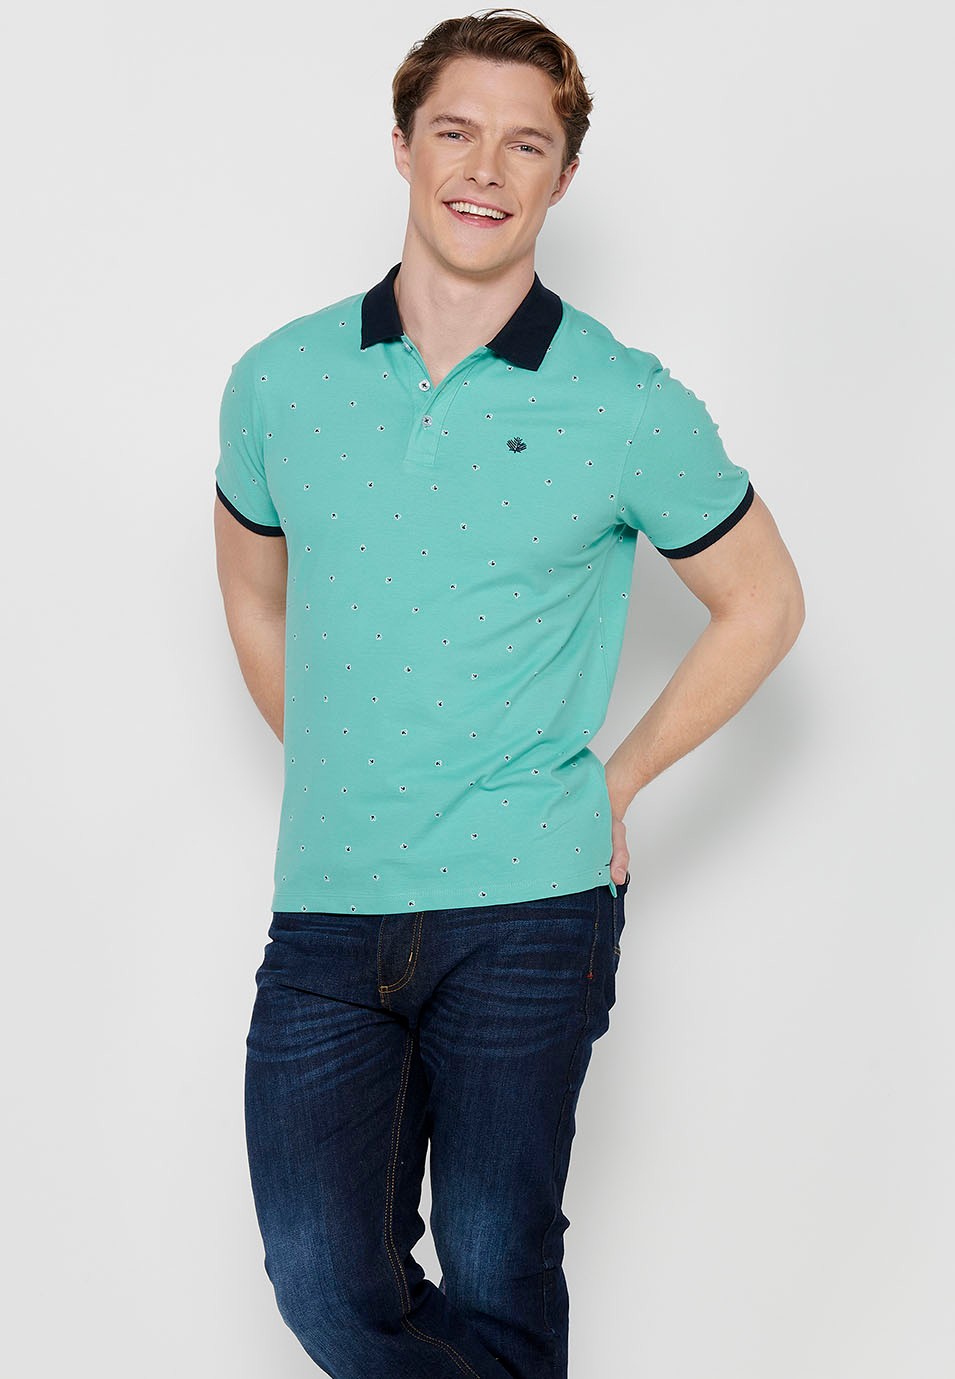 Men's mint printed cotton short-sleeved polo shirt